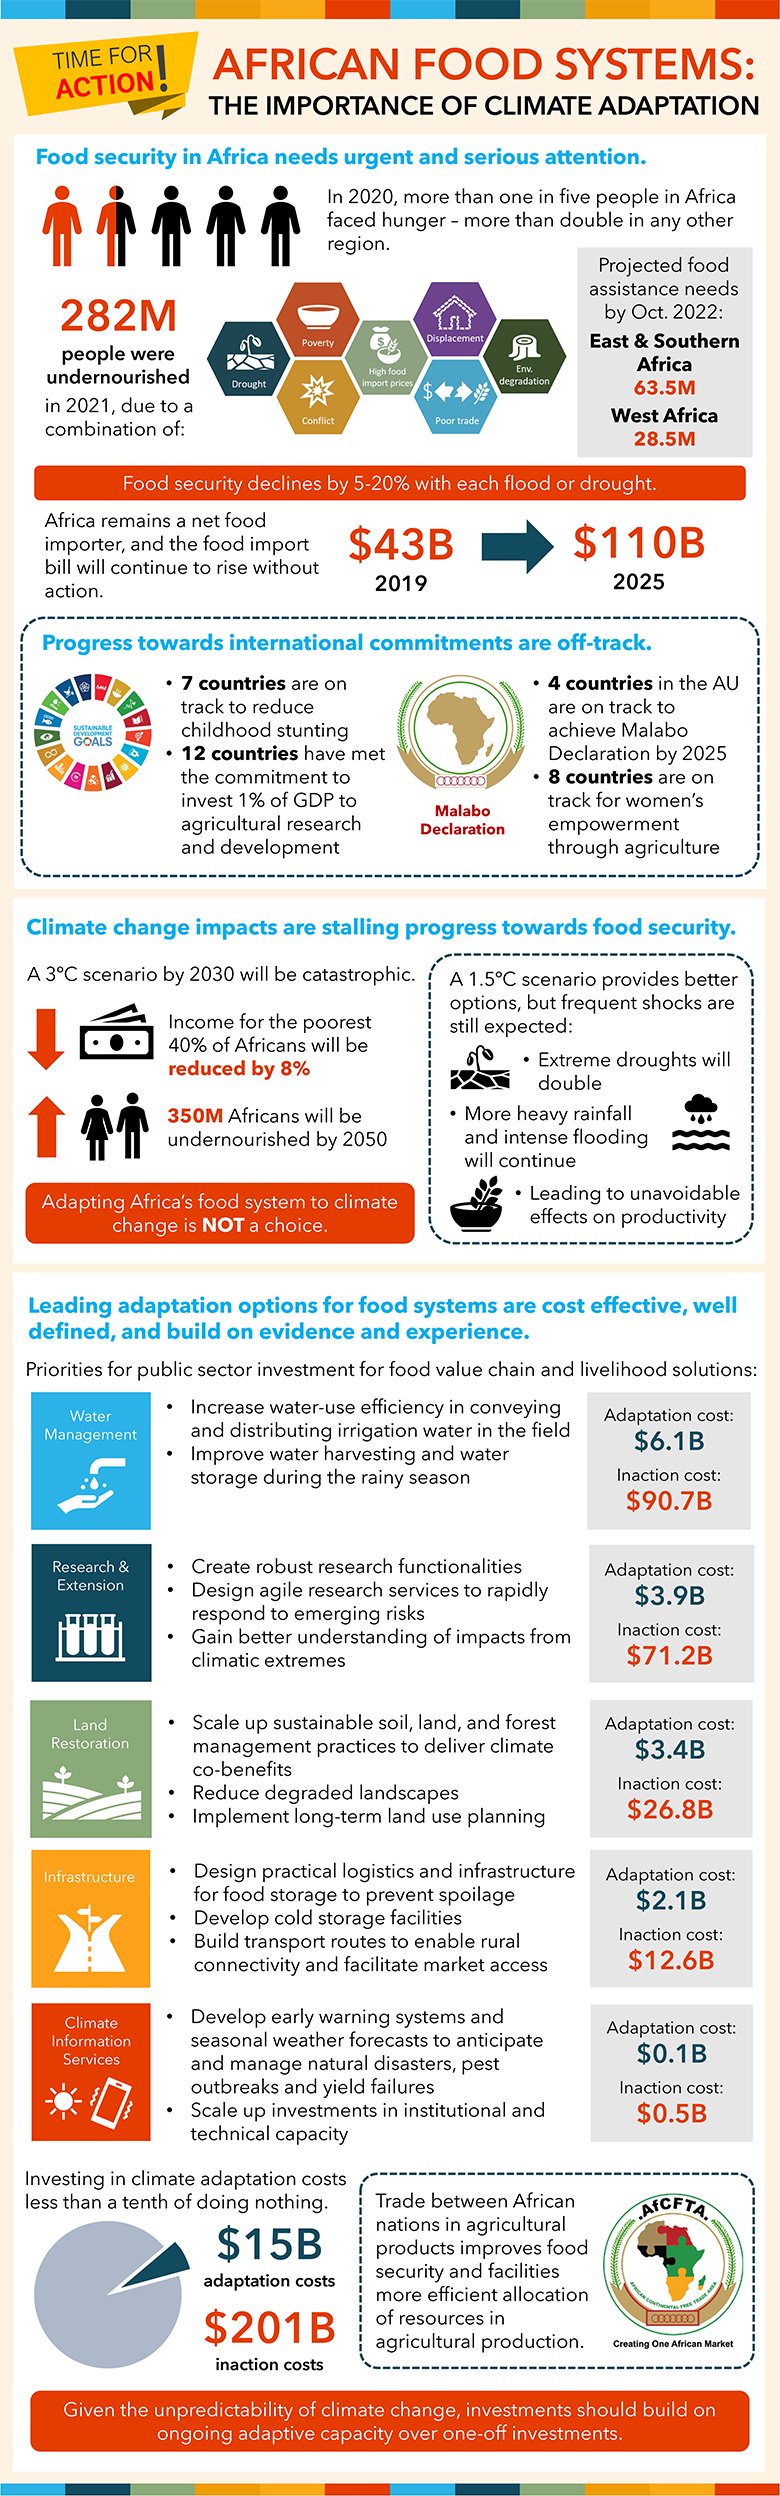 African Food System: The Importance of Climate Adaptation